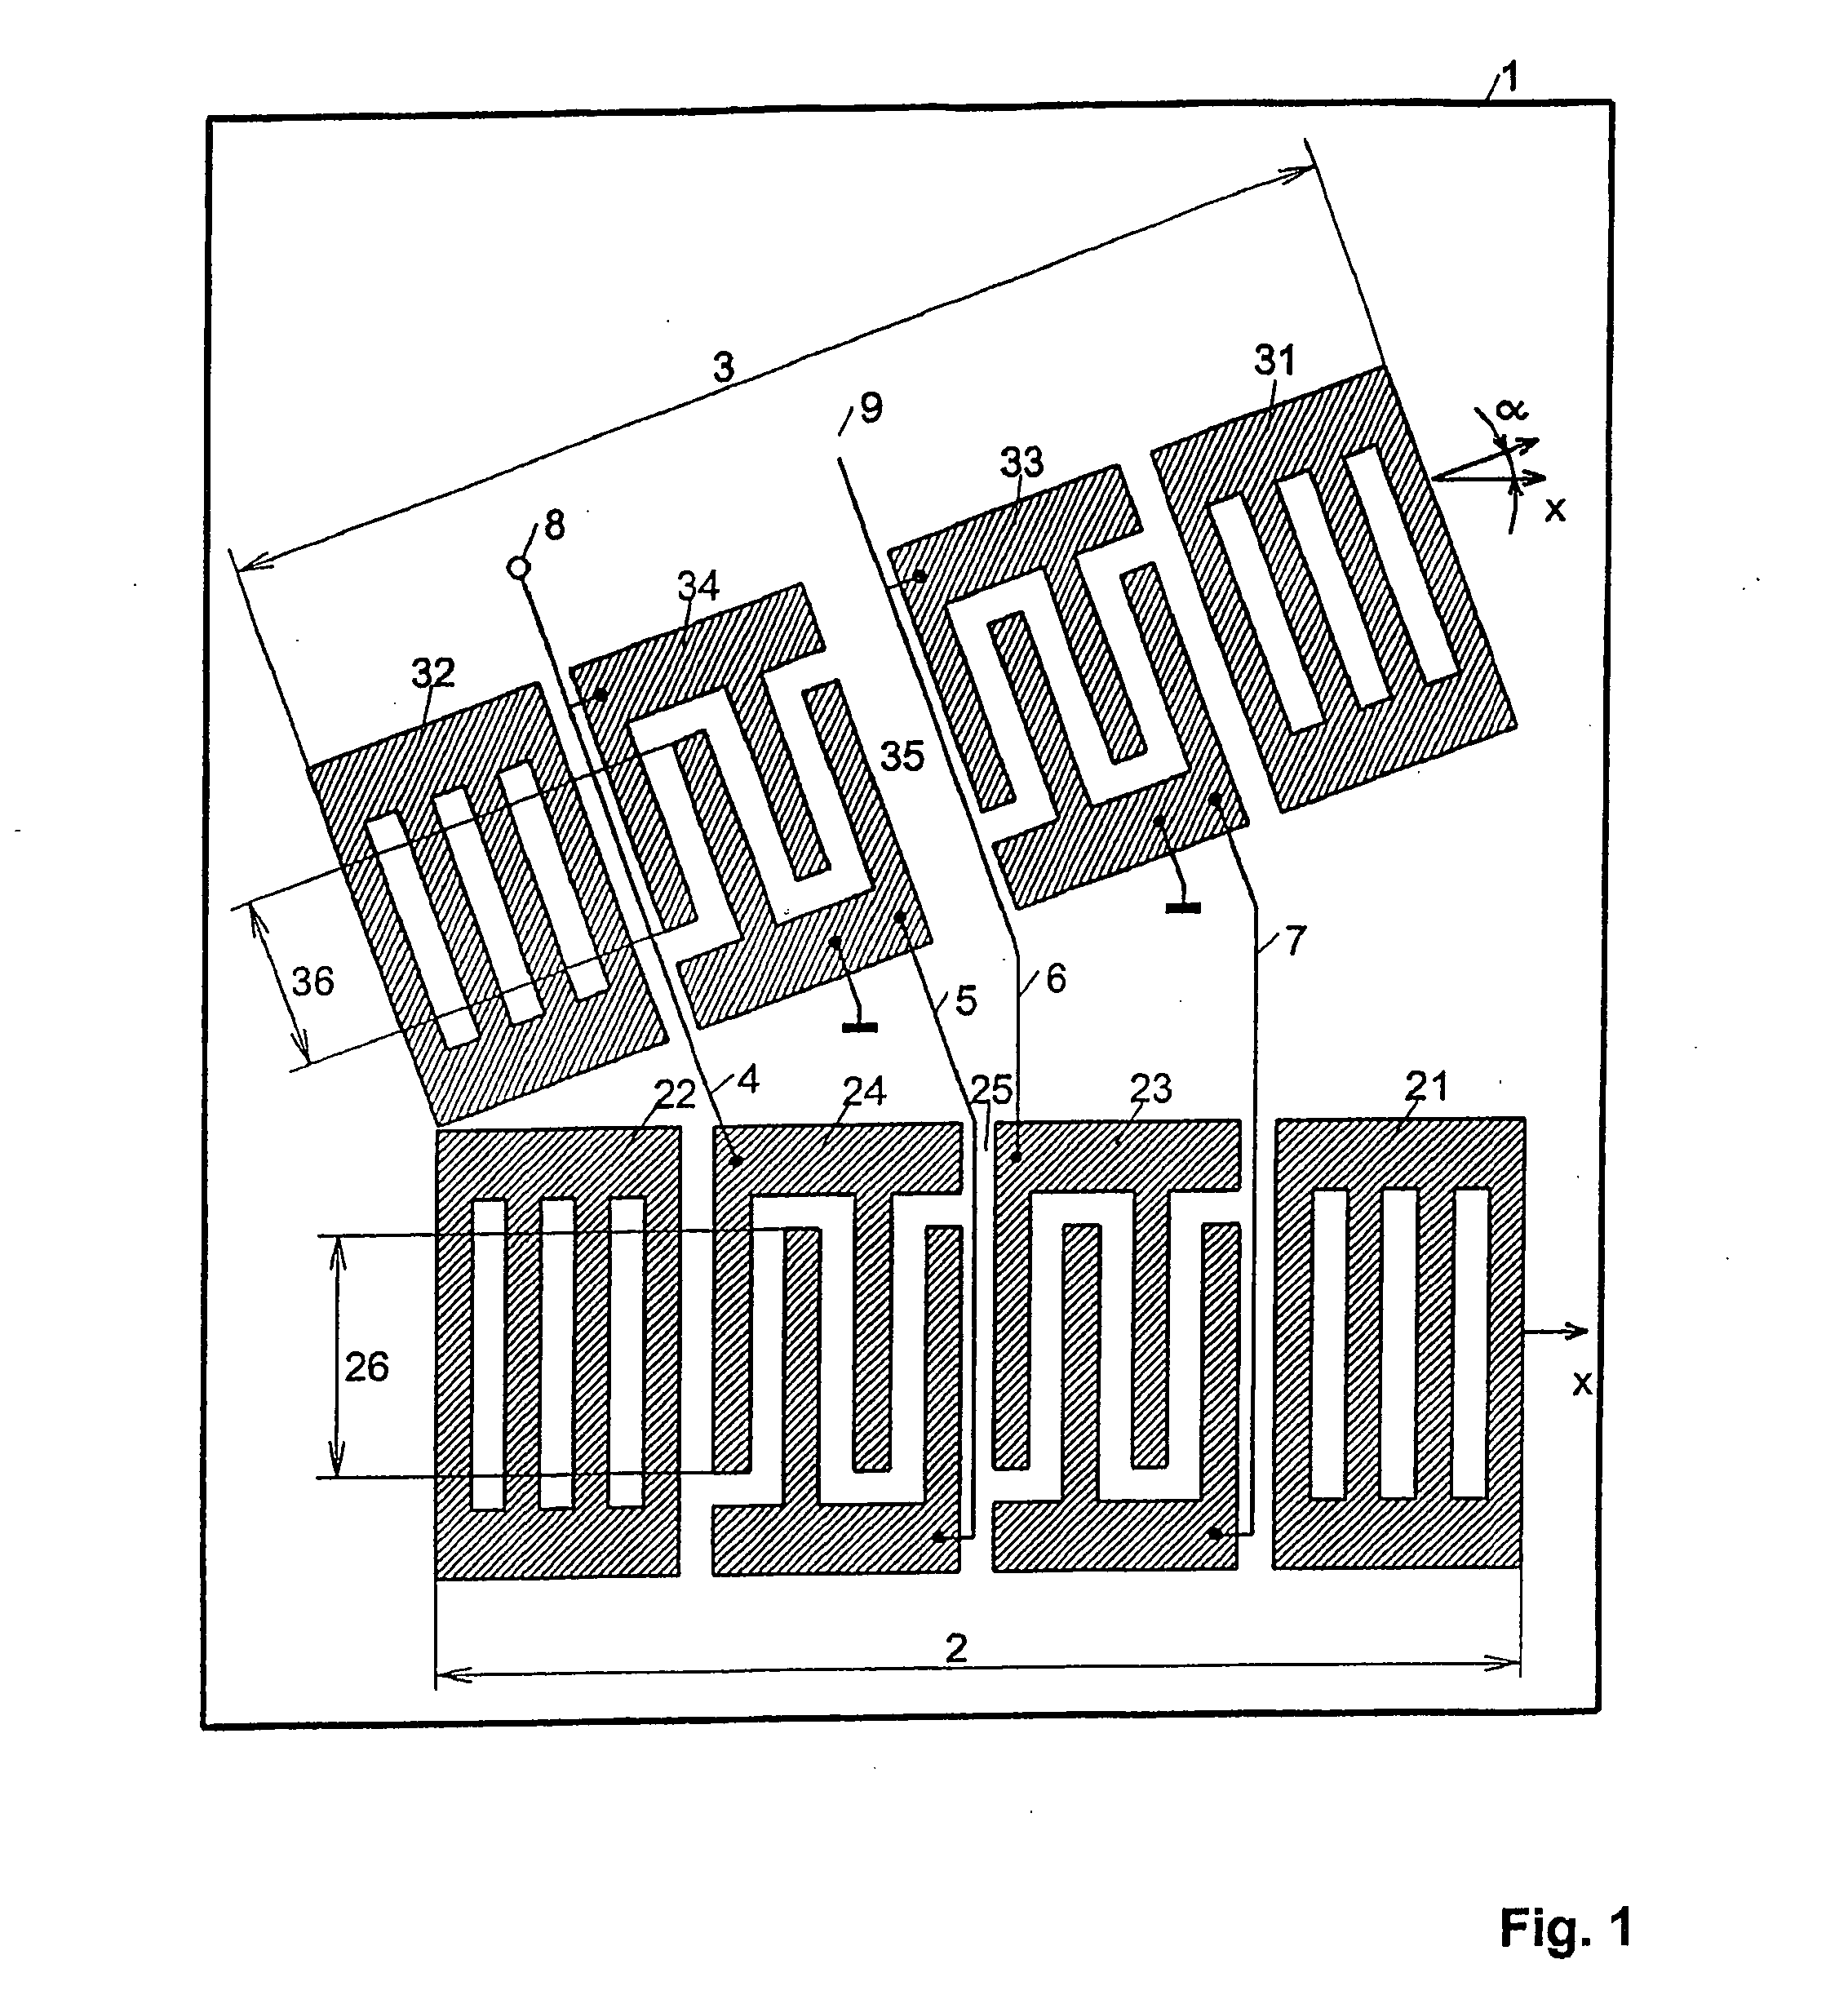 Oscillator with acoustic surface wave resonators